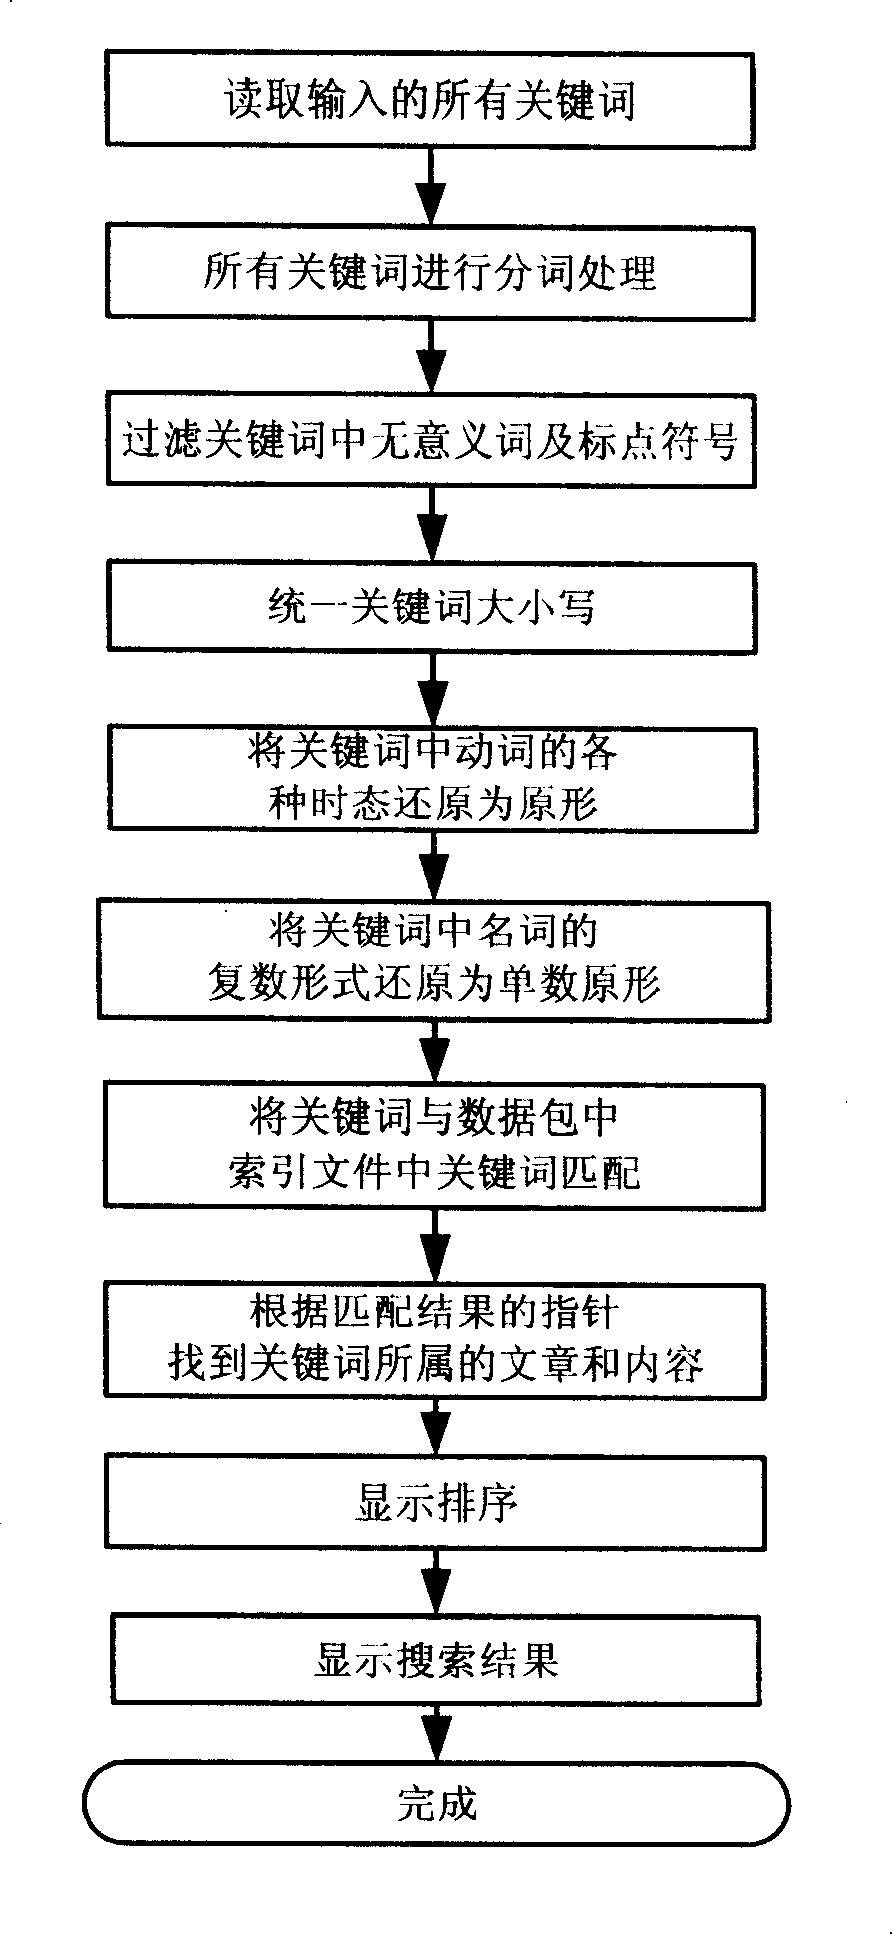 Method for combining study and searching aiming at test question implemented on personal hand-held study terminal